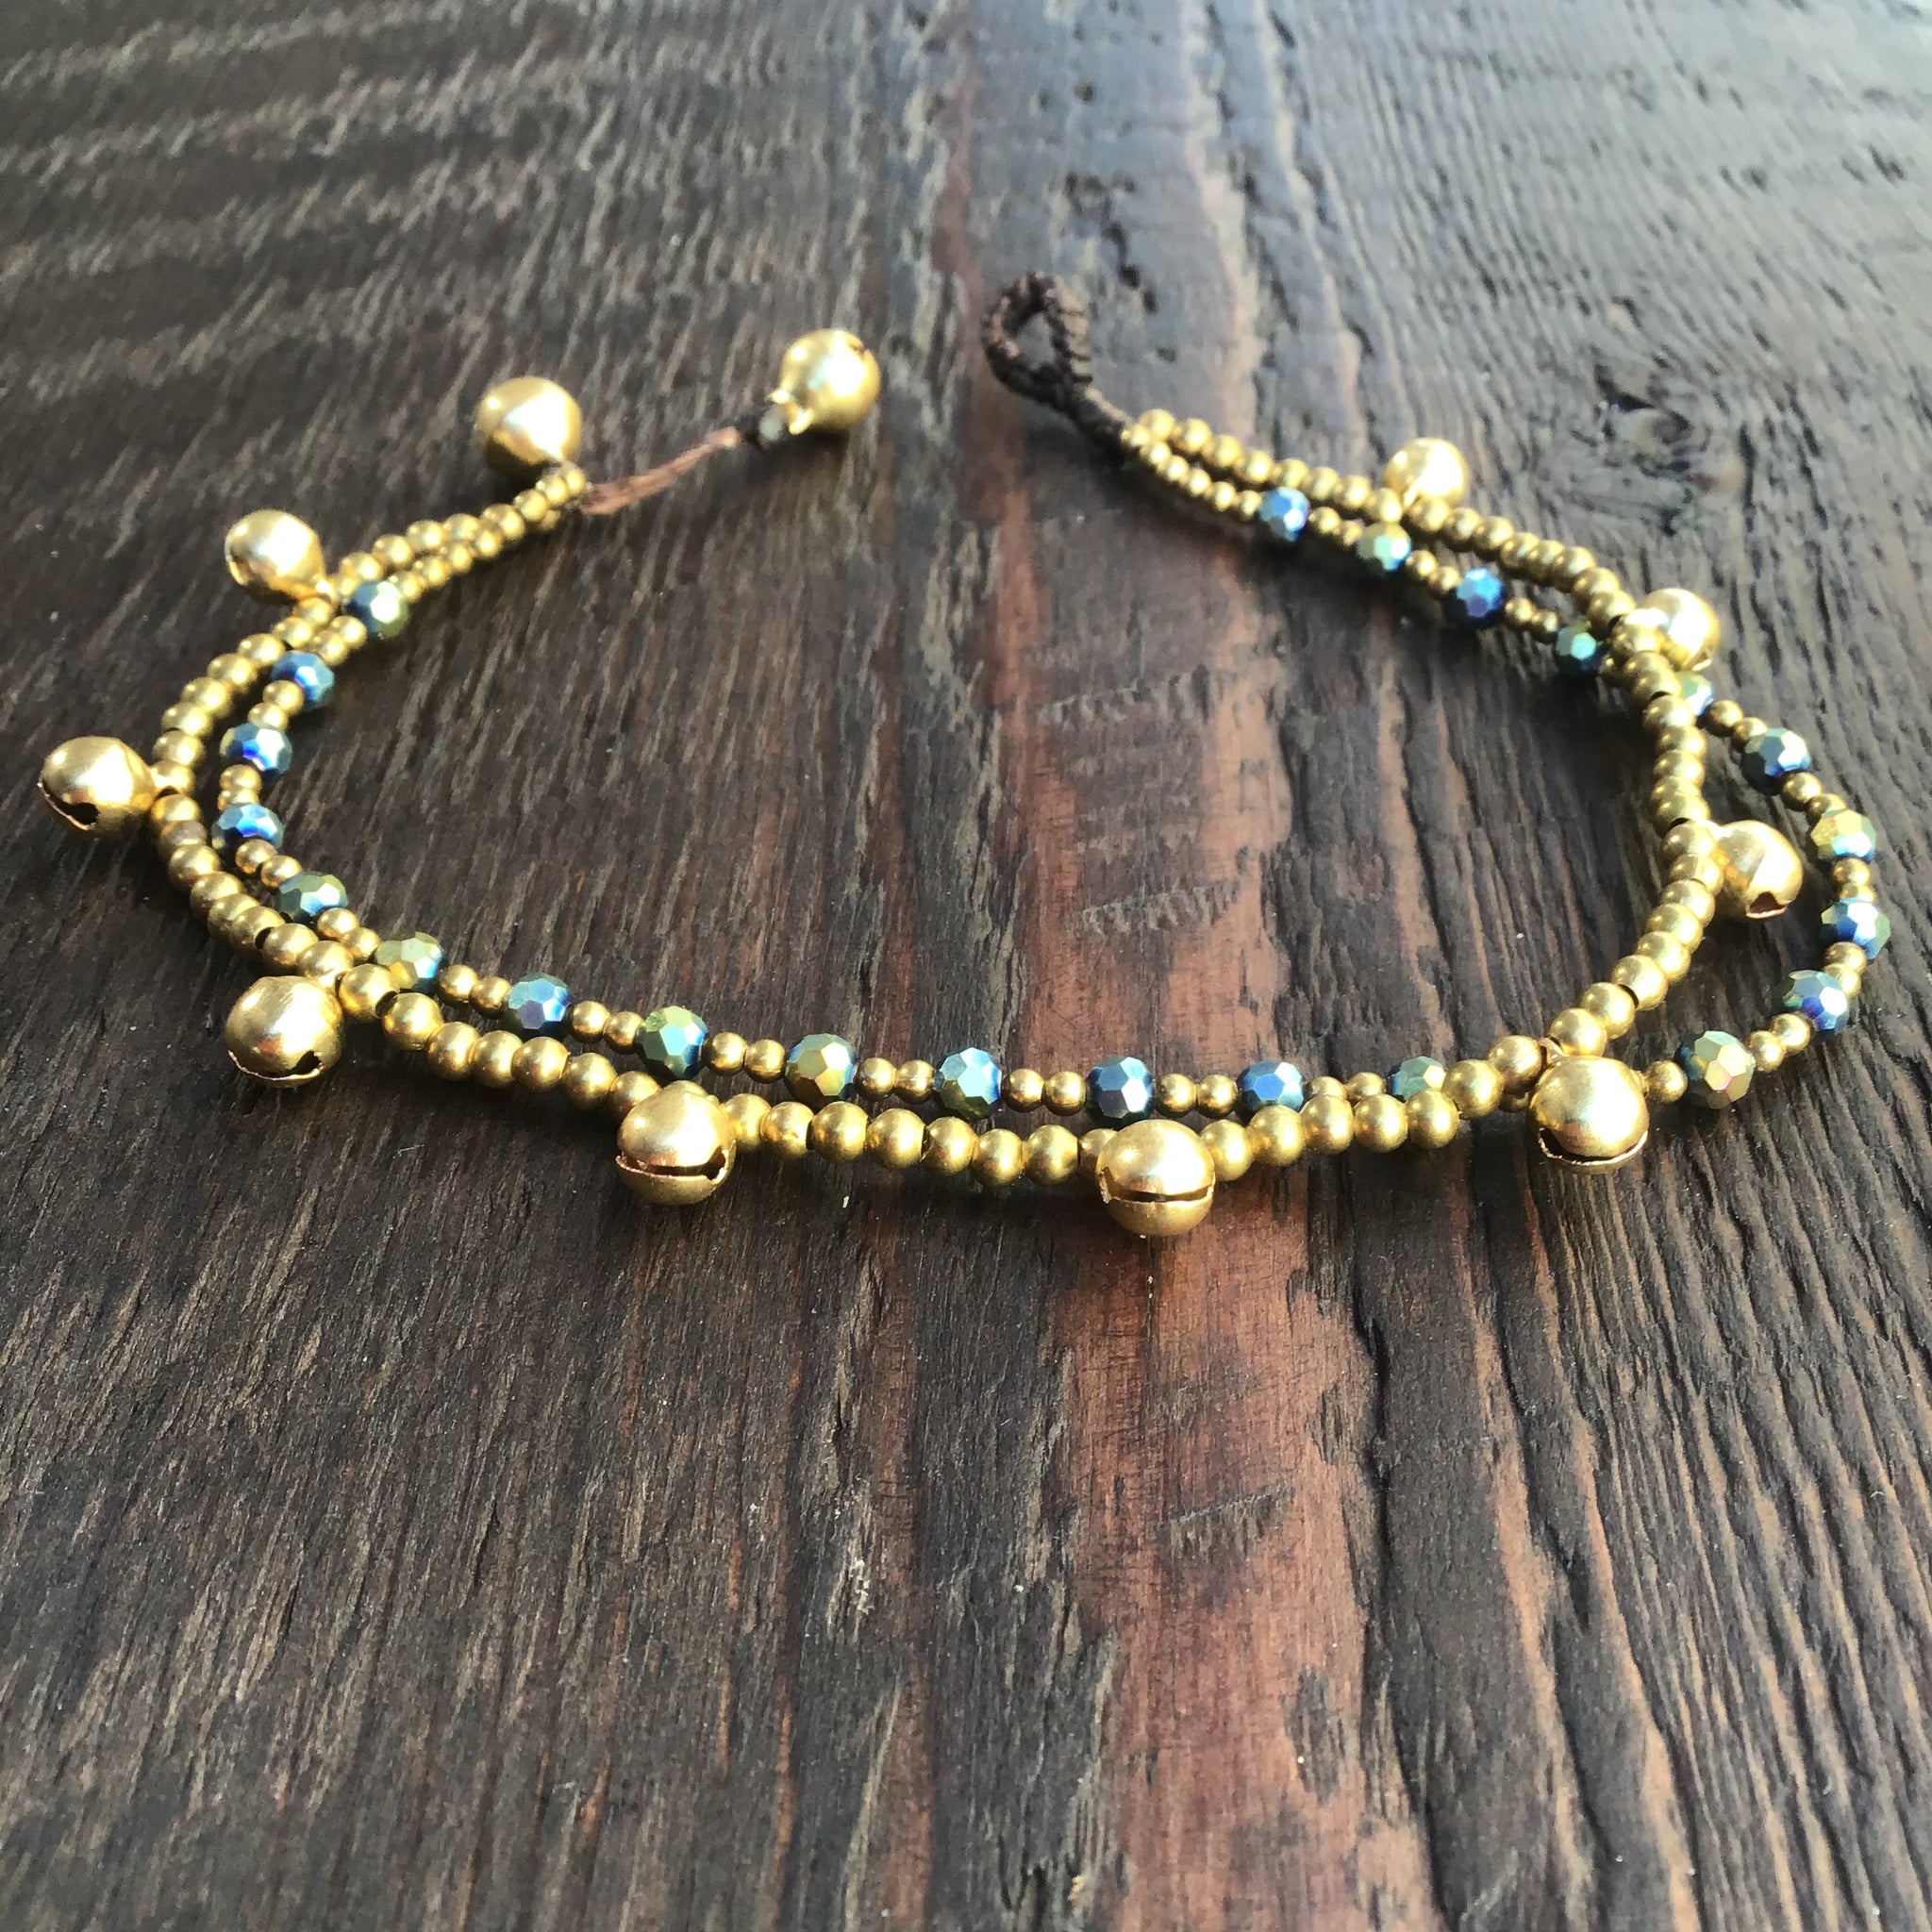 ‘Bead Love' 2 Strand Anklet with Faceted Beads (Iridescent Blue)